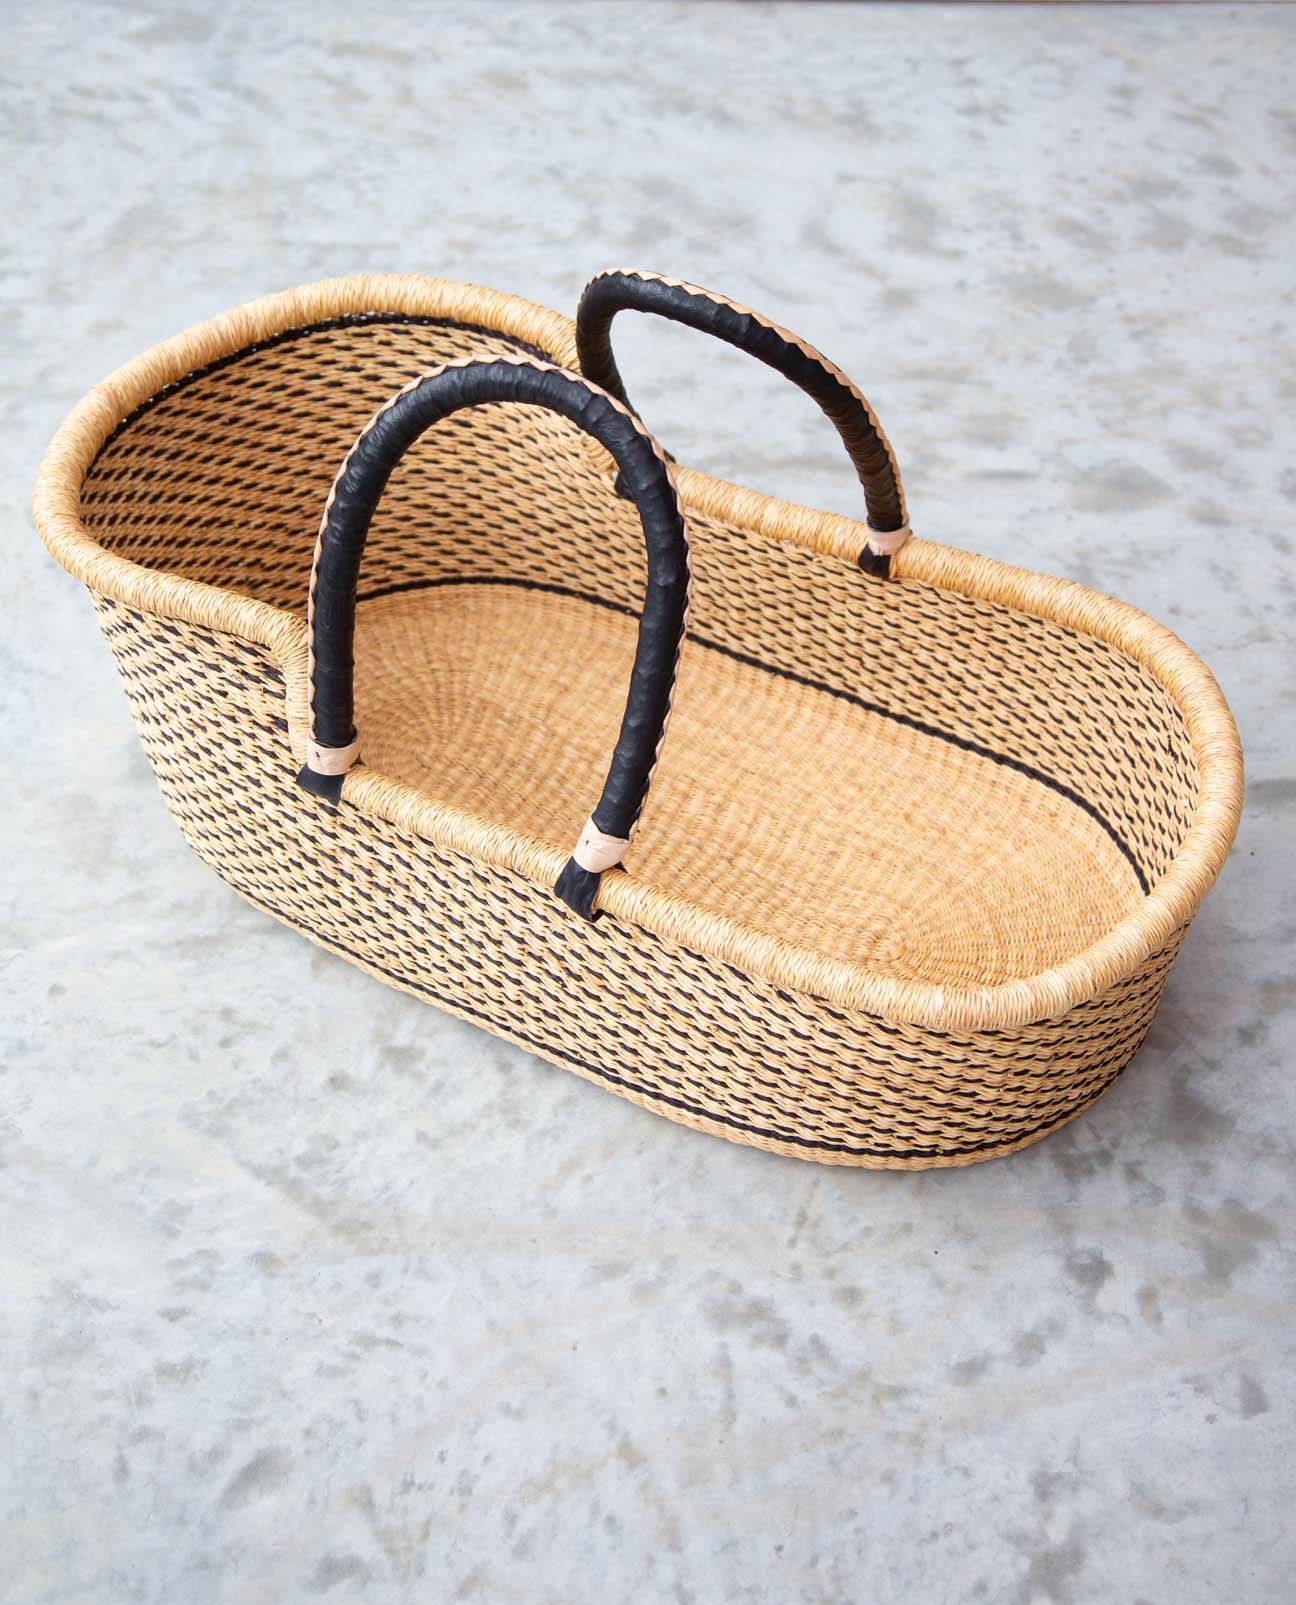 SISI Handwoven Moses Basket With Leather Handles